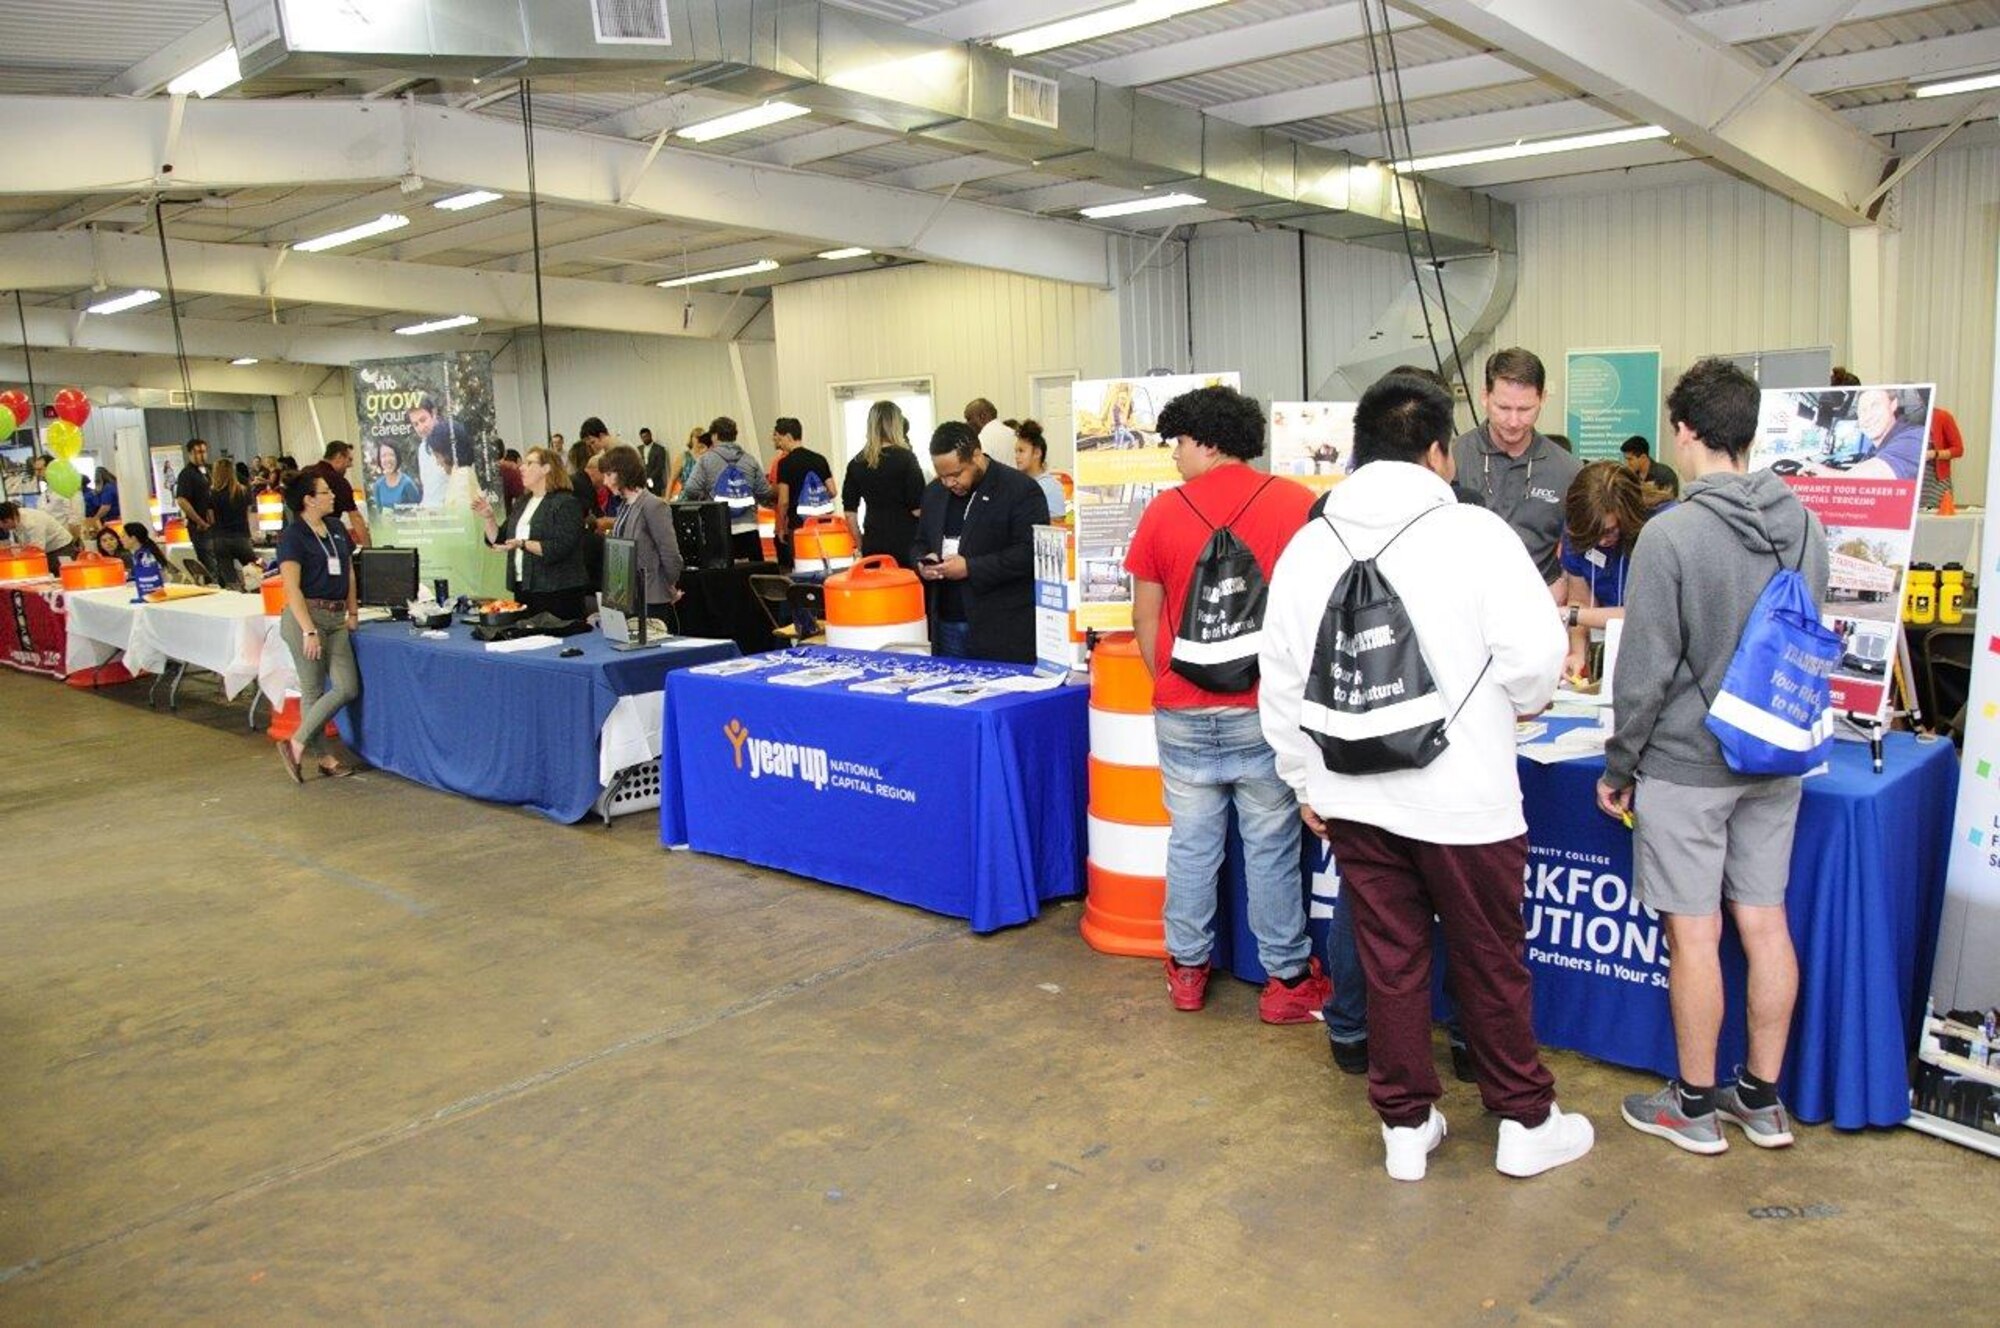 Flight nurses and medical technicians of the 459th Aeromedical Evacuation Squadron talk to students about their careers at the 14th Annual Northern Virginia Transportation Career Fair for High School Students in Manassas, Va. The career fair is part of a Federal Highway Administration initiative to promote the transportation industry and the careers it offers to America’s youth.